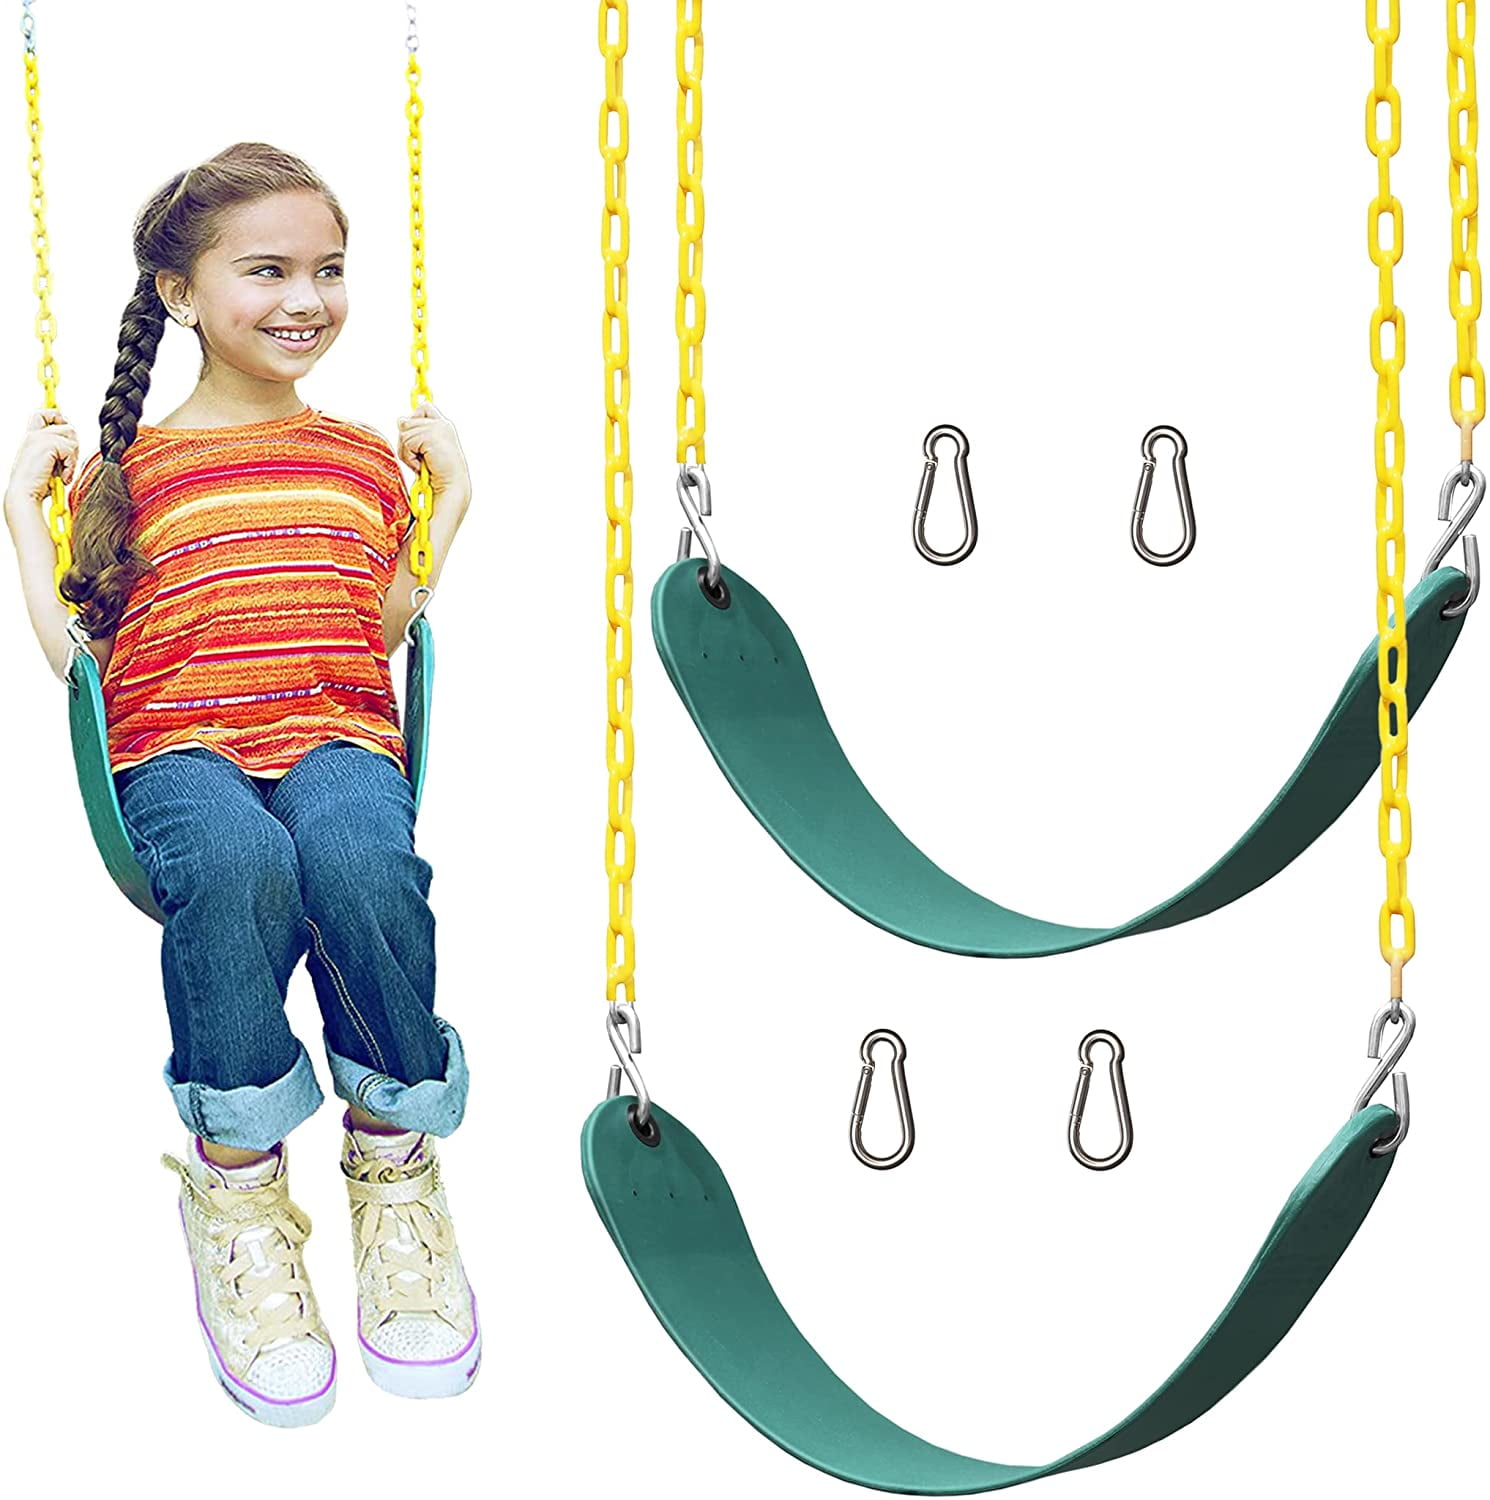 Heavy Duty Outdoor Hanging Swing Seat Set w/ Replacement Chains Play Kids 2 Pack 